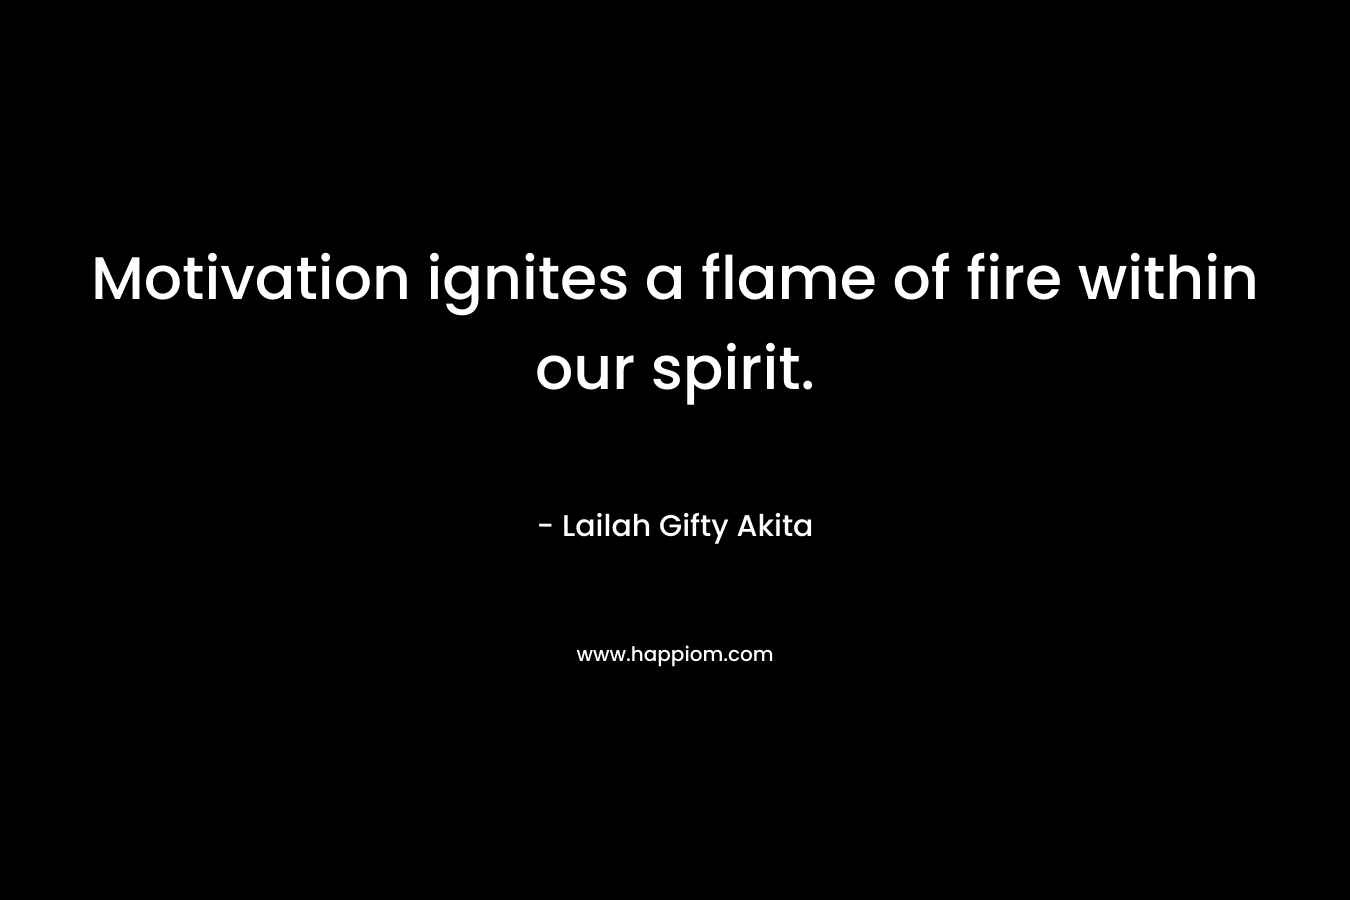 Motivation ignites a flame of fire within our spirit. – Lailah Gifty Akita